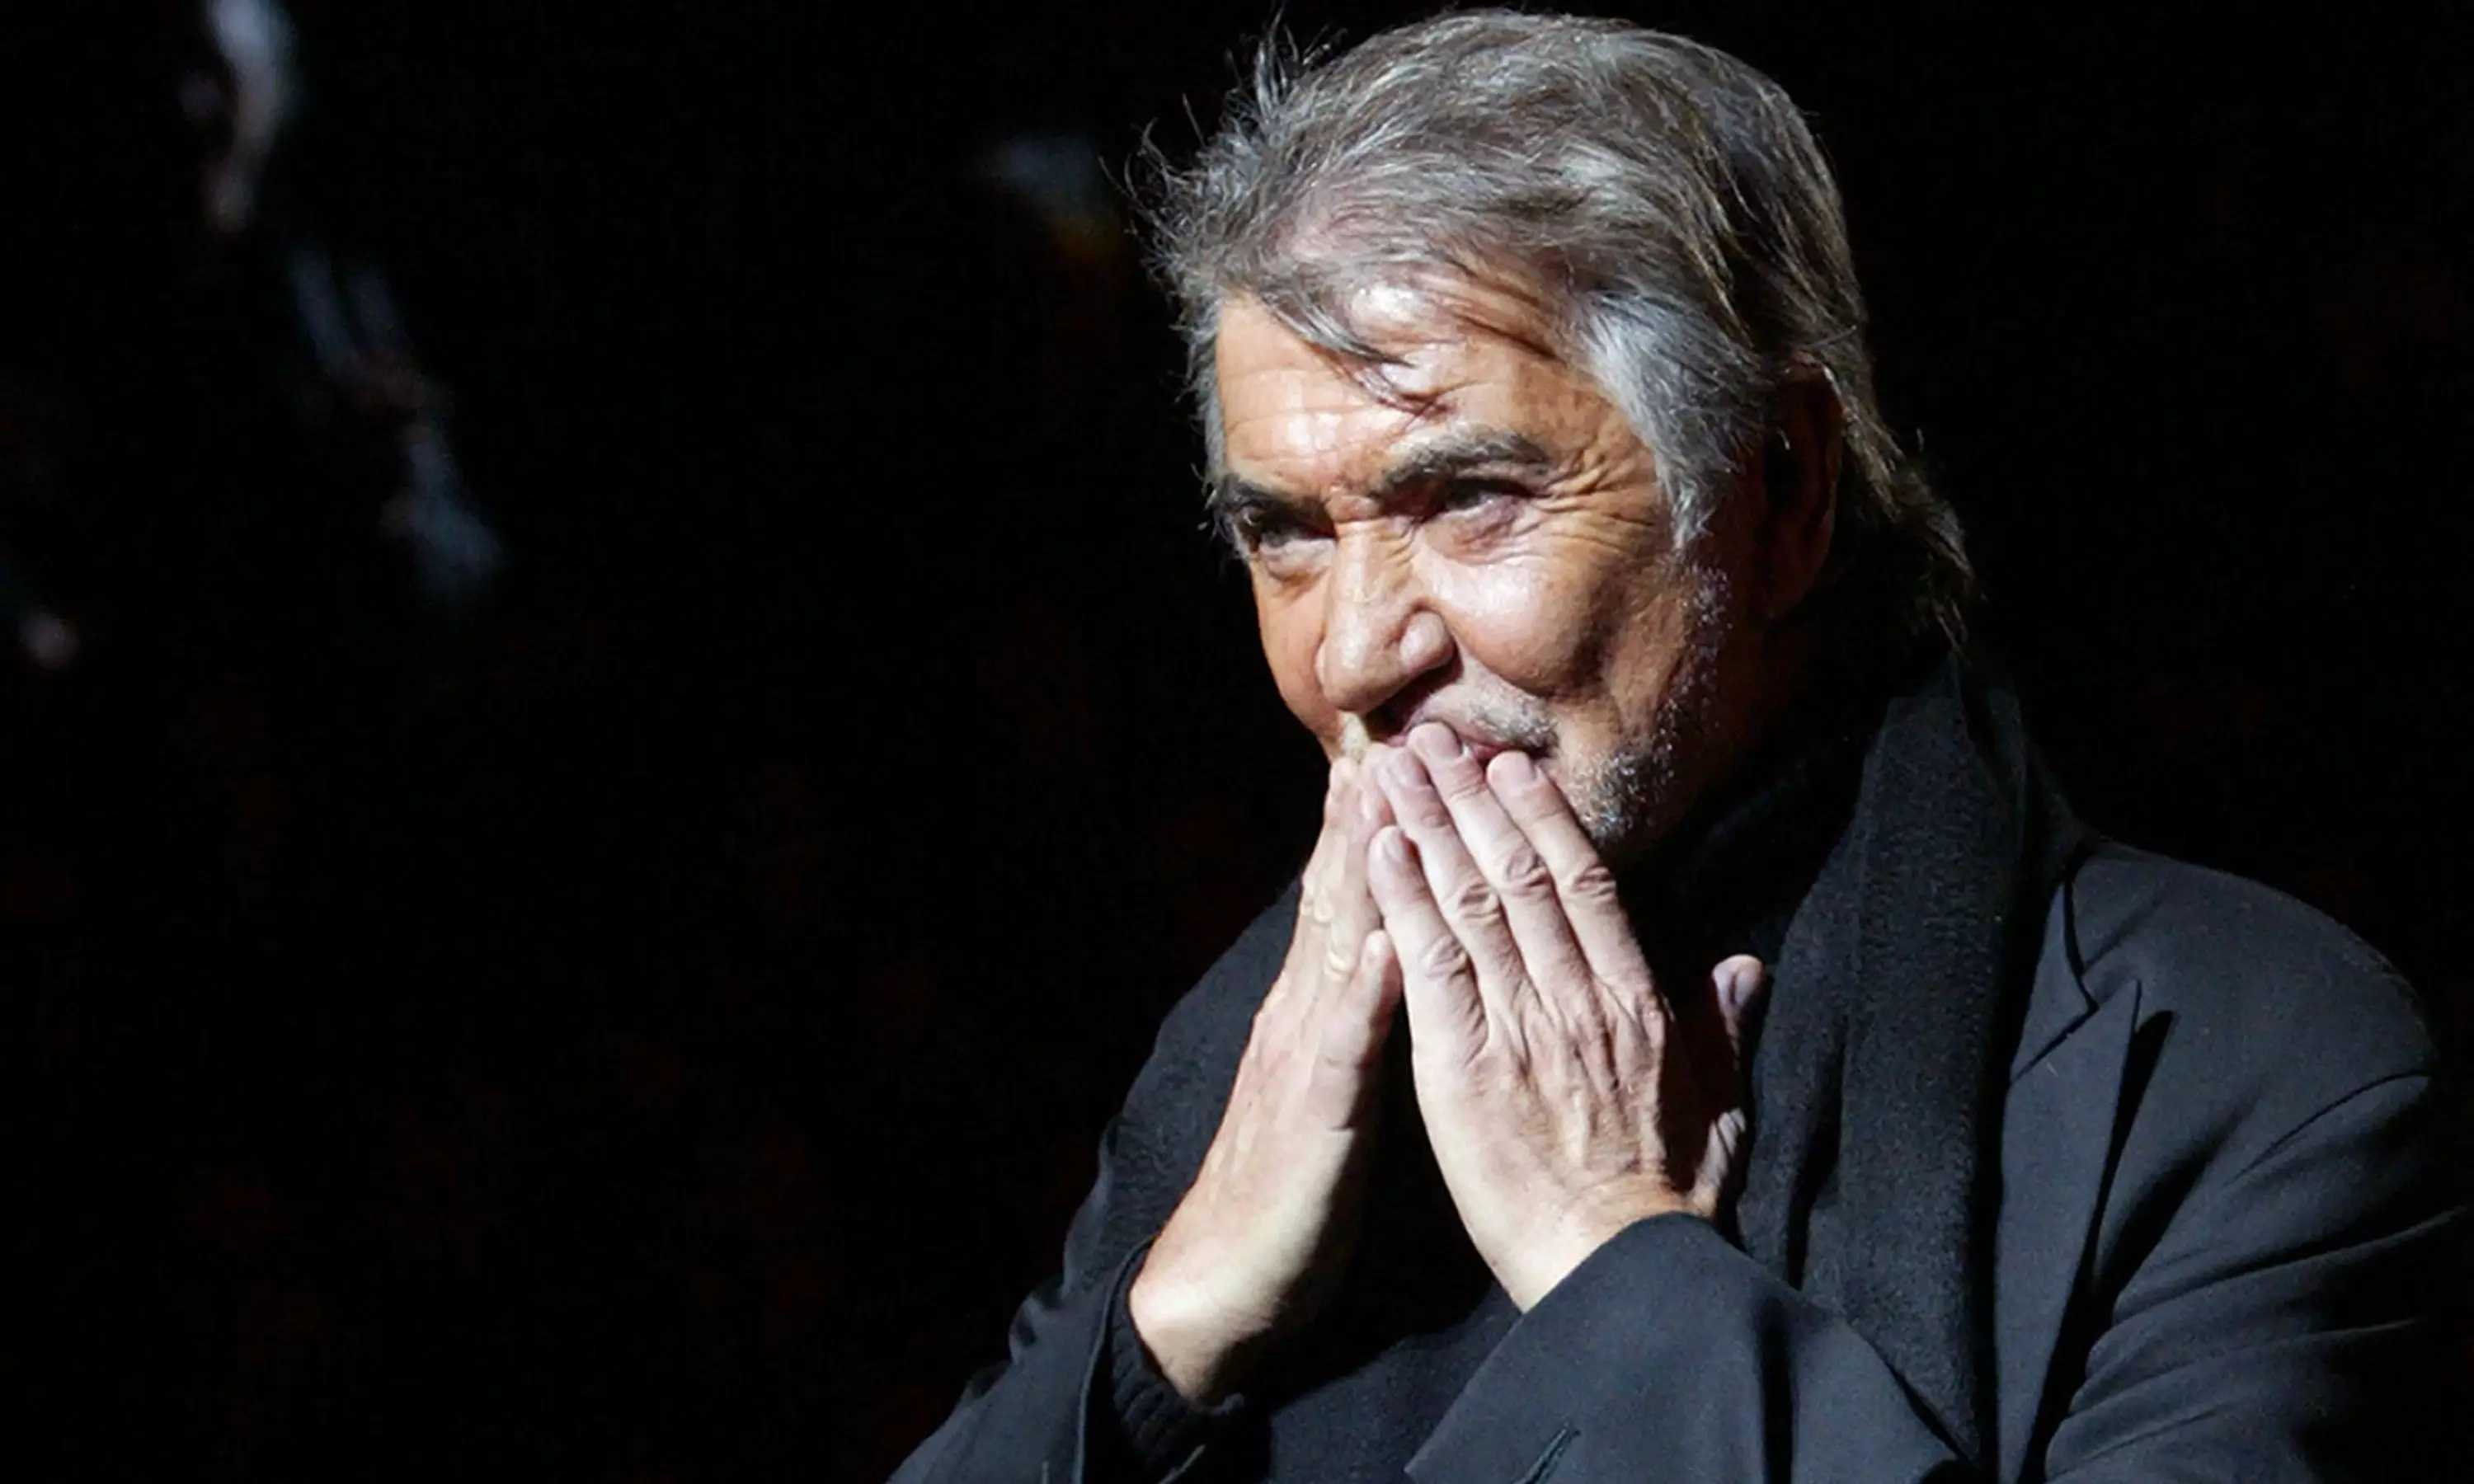 Italian Fashion Icon Roberto Cavalli Dies at 83, Leaving a Legacy of Glamour and Innovation